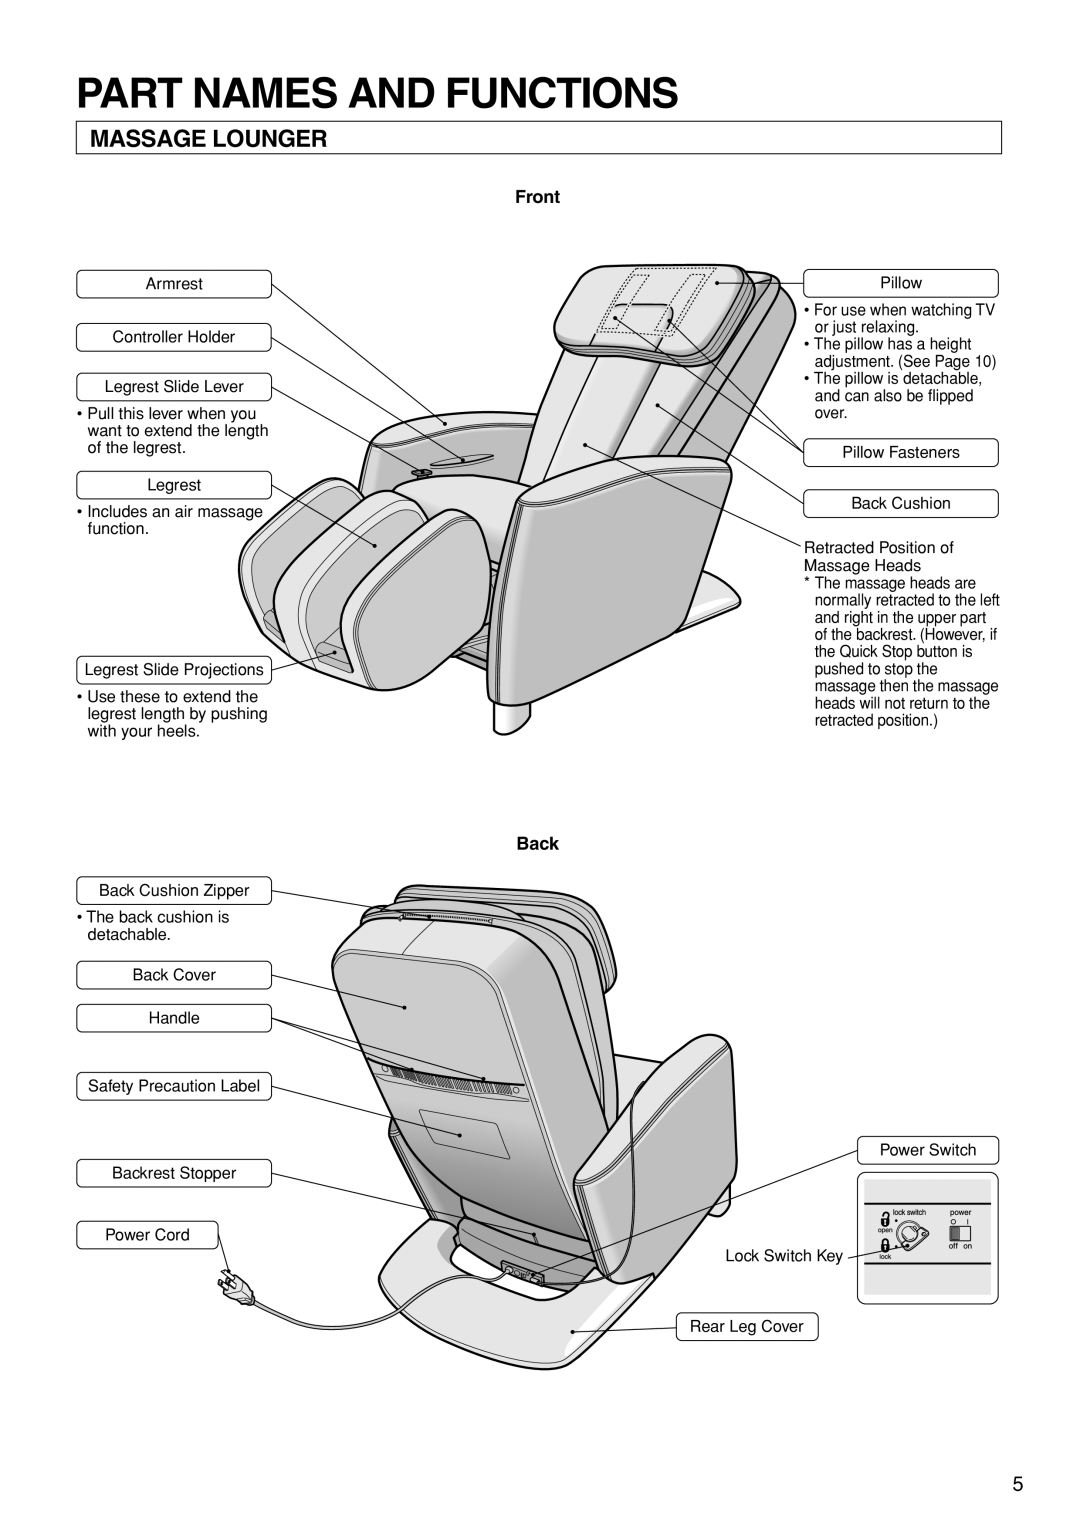 Panasonic EP1273 operating instructions Part Names And Functions, Massage Lounger, Front, Back 